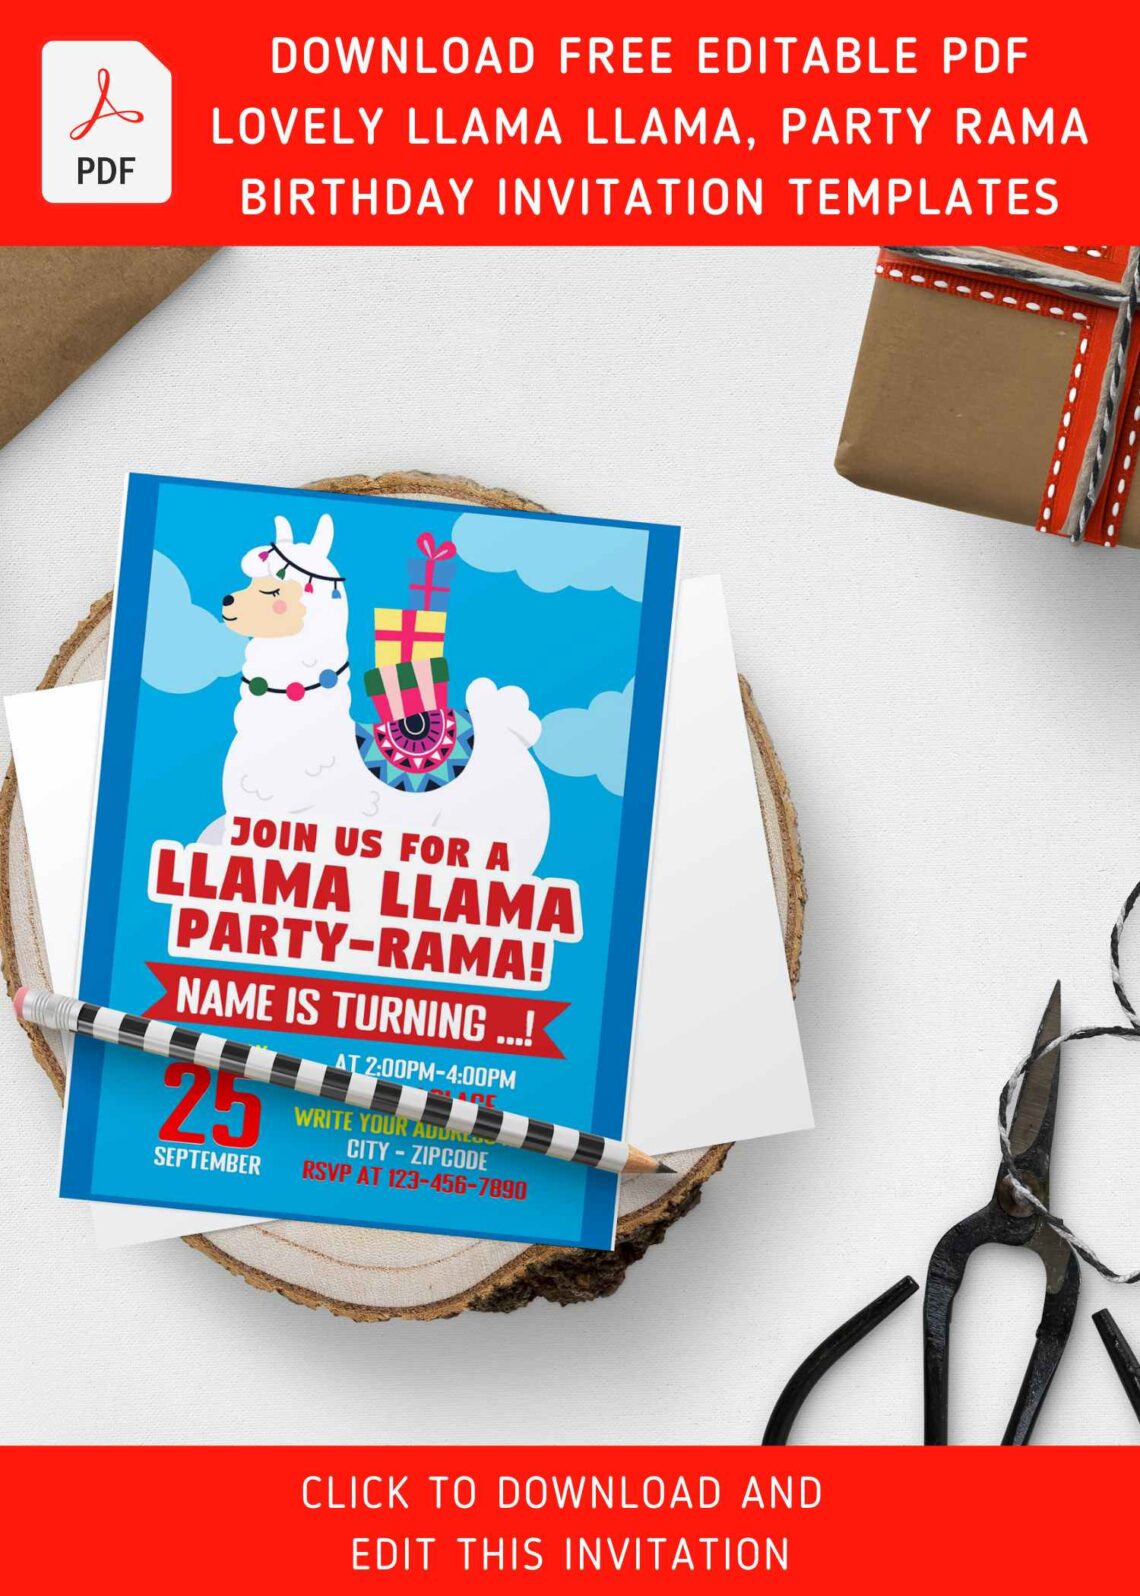 (Free Editable PDF) Lovely Llama Party-Rama Birthday Invitation Templates with fluffy clouds